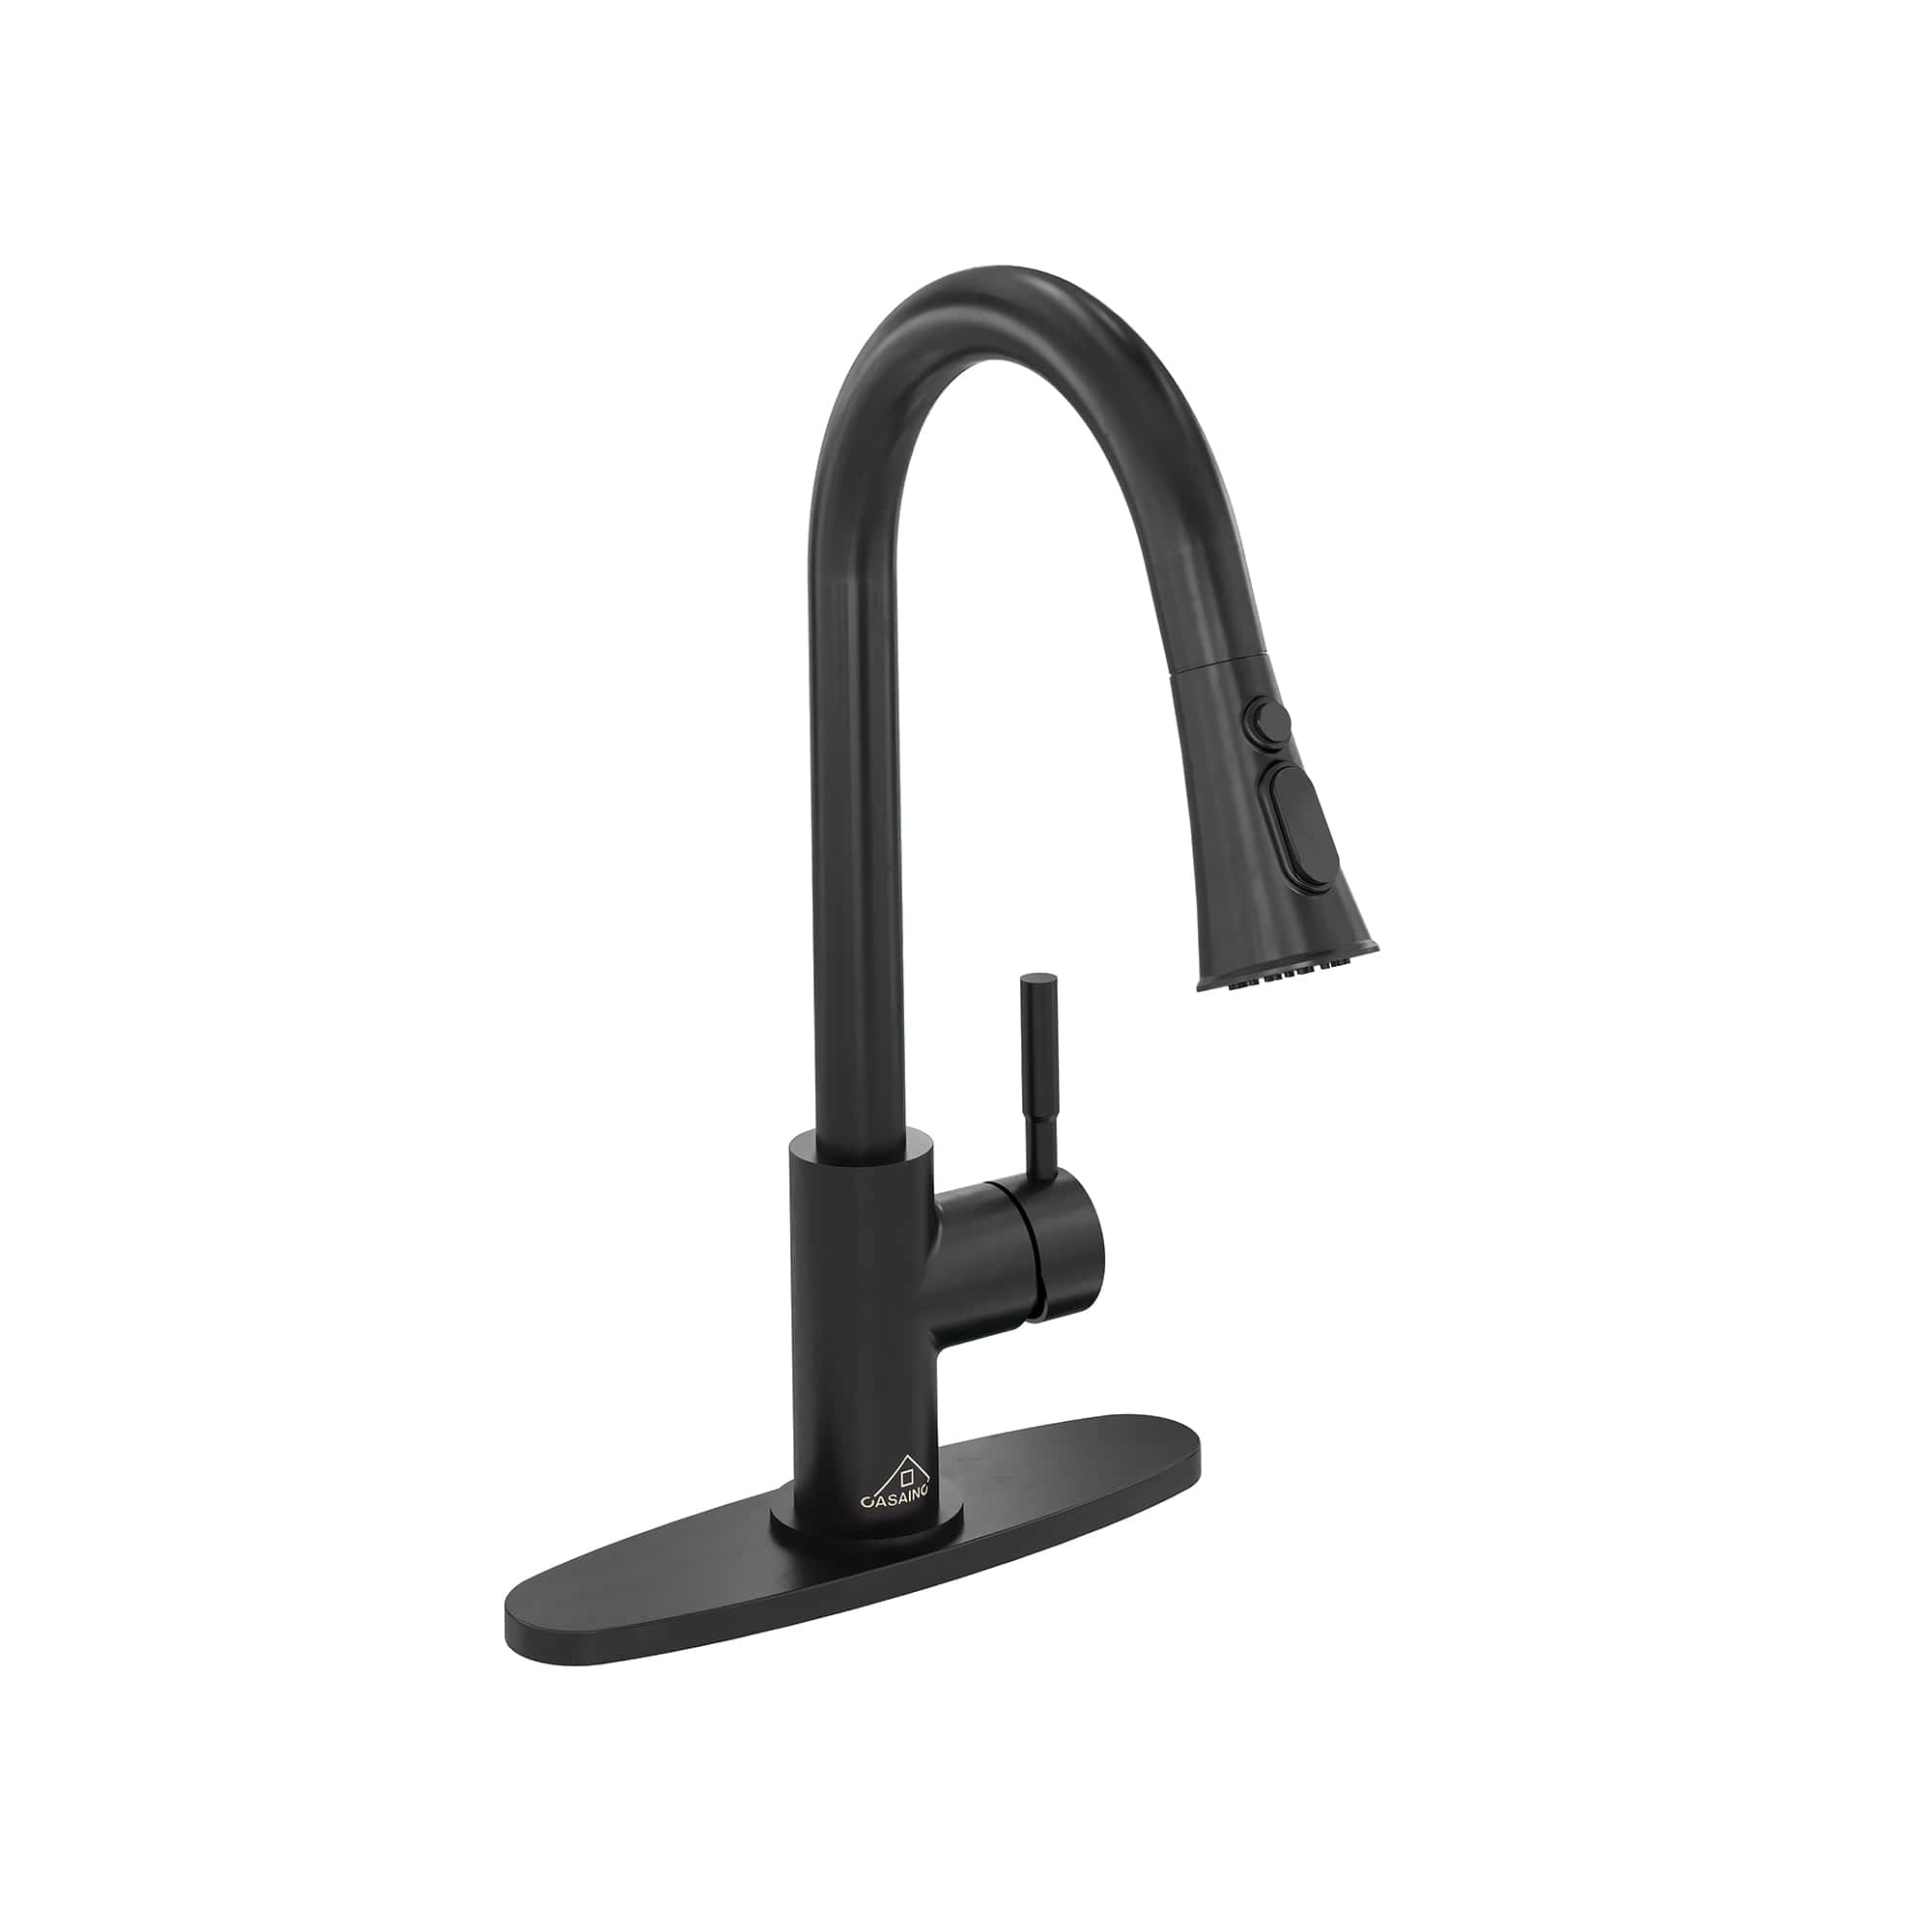 CASAINC 1.8GPM Pull-out Kitchen Faucet in Brushesd Nickel and More